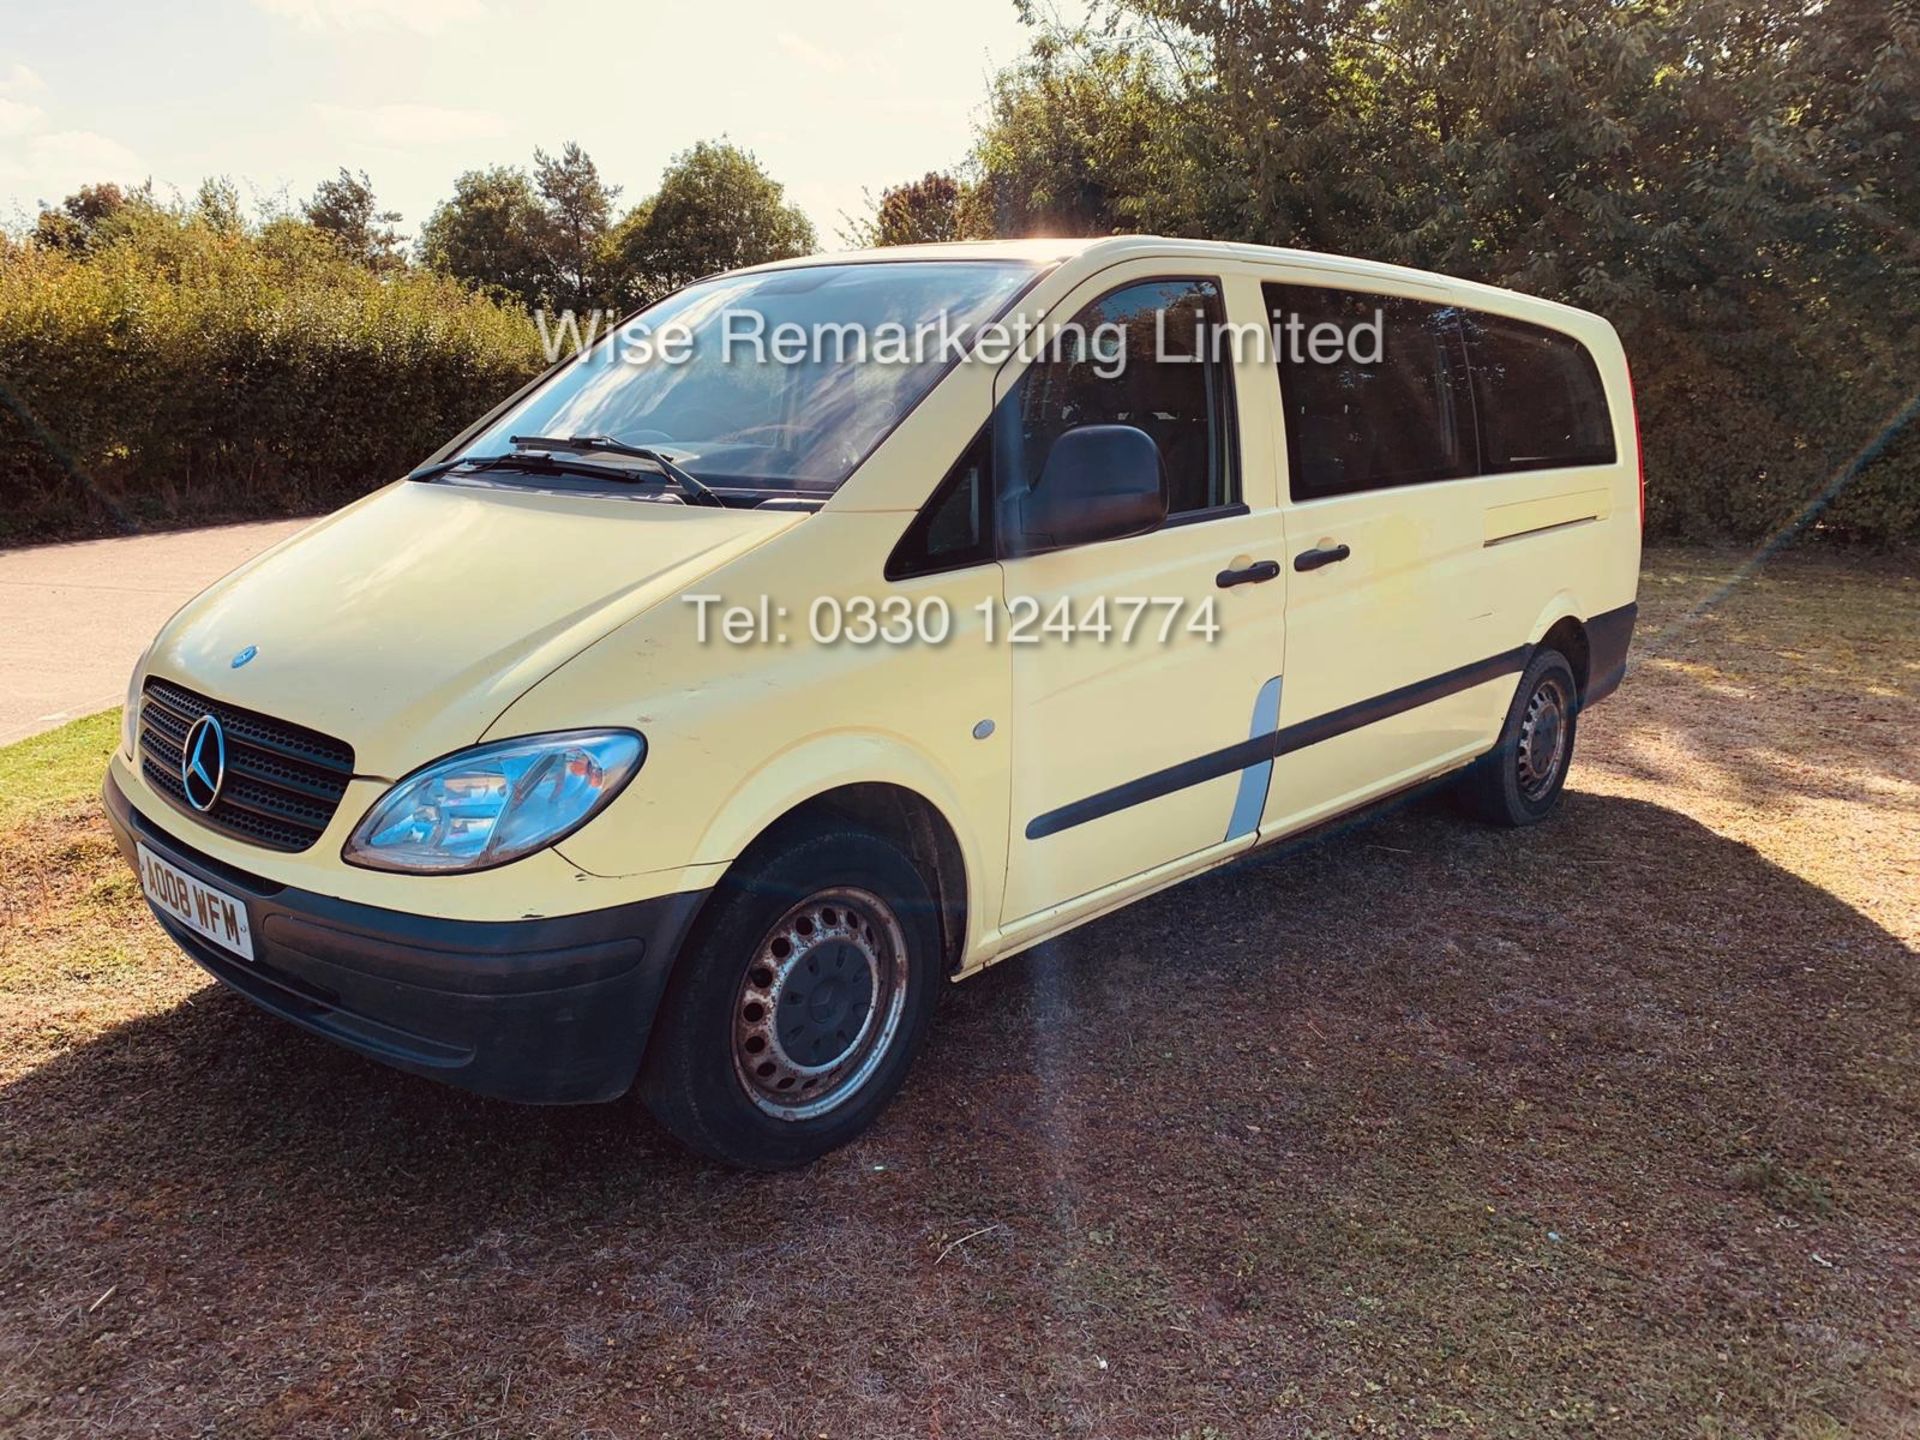 MERCEDES VITO 111 2.1 CDI TRAVELINER **9 SEATER** (2008 08 REG) 1 KEEPER FROM NEW